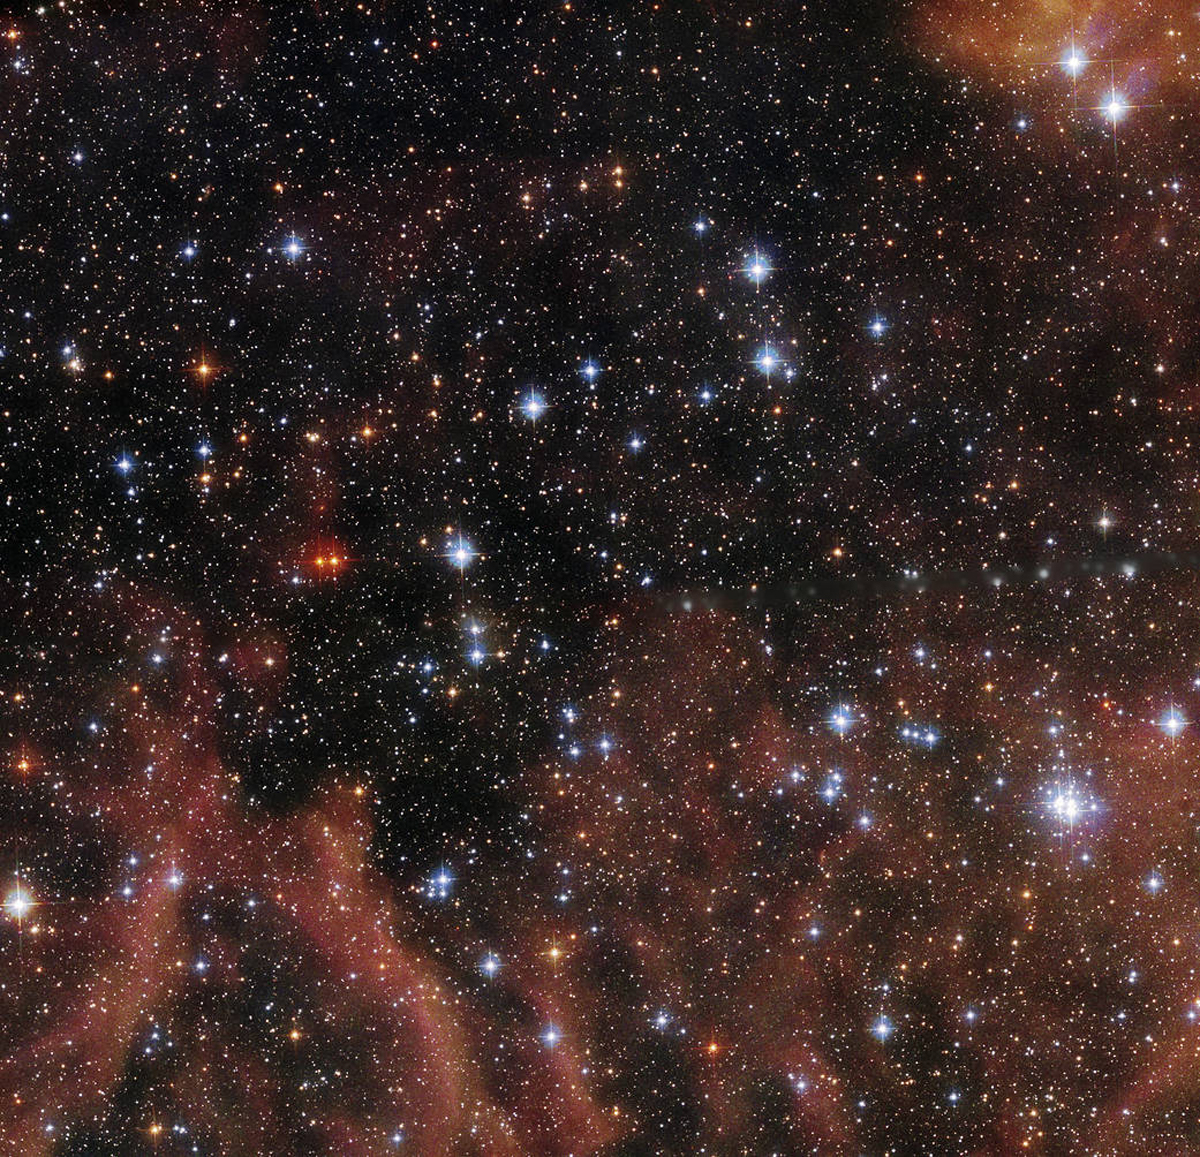 This image from the Hubble Space Telescope shows the open star cluster BSDL 2757, located in the dwarf galaxy the Large Magellanic Cloud.